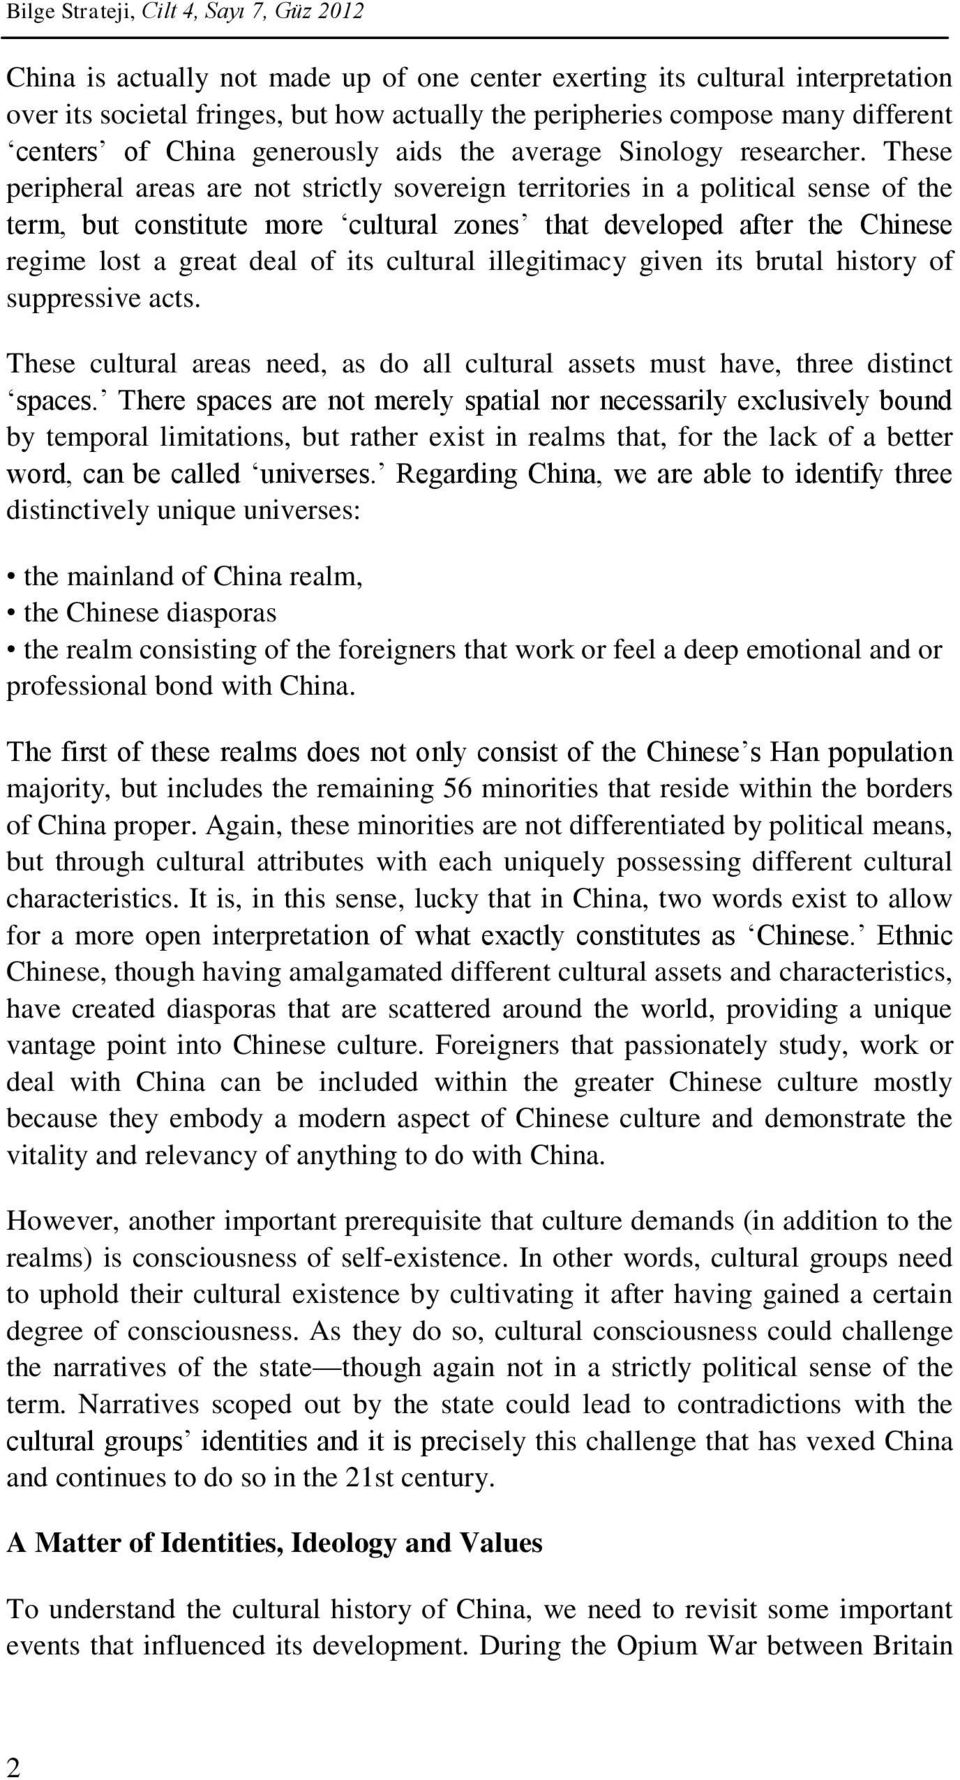 These peripheral areas are not strictly sovereign territories in a political sense of the term, but constitute more cultural zones that developed after the Chinese regime lost a great deal of its